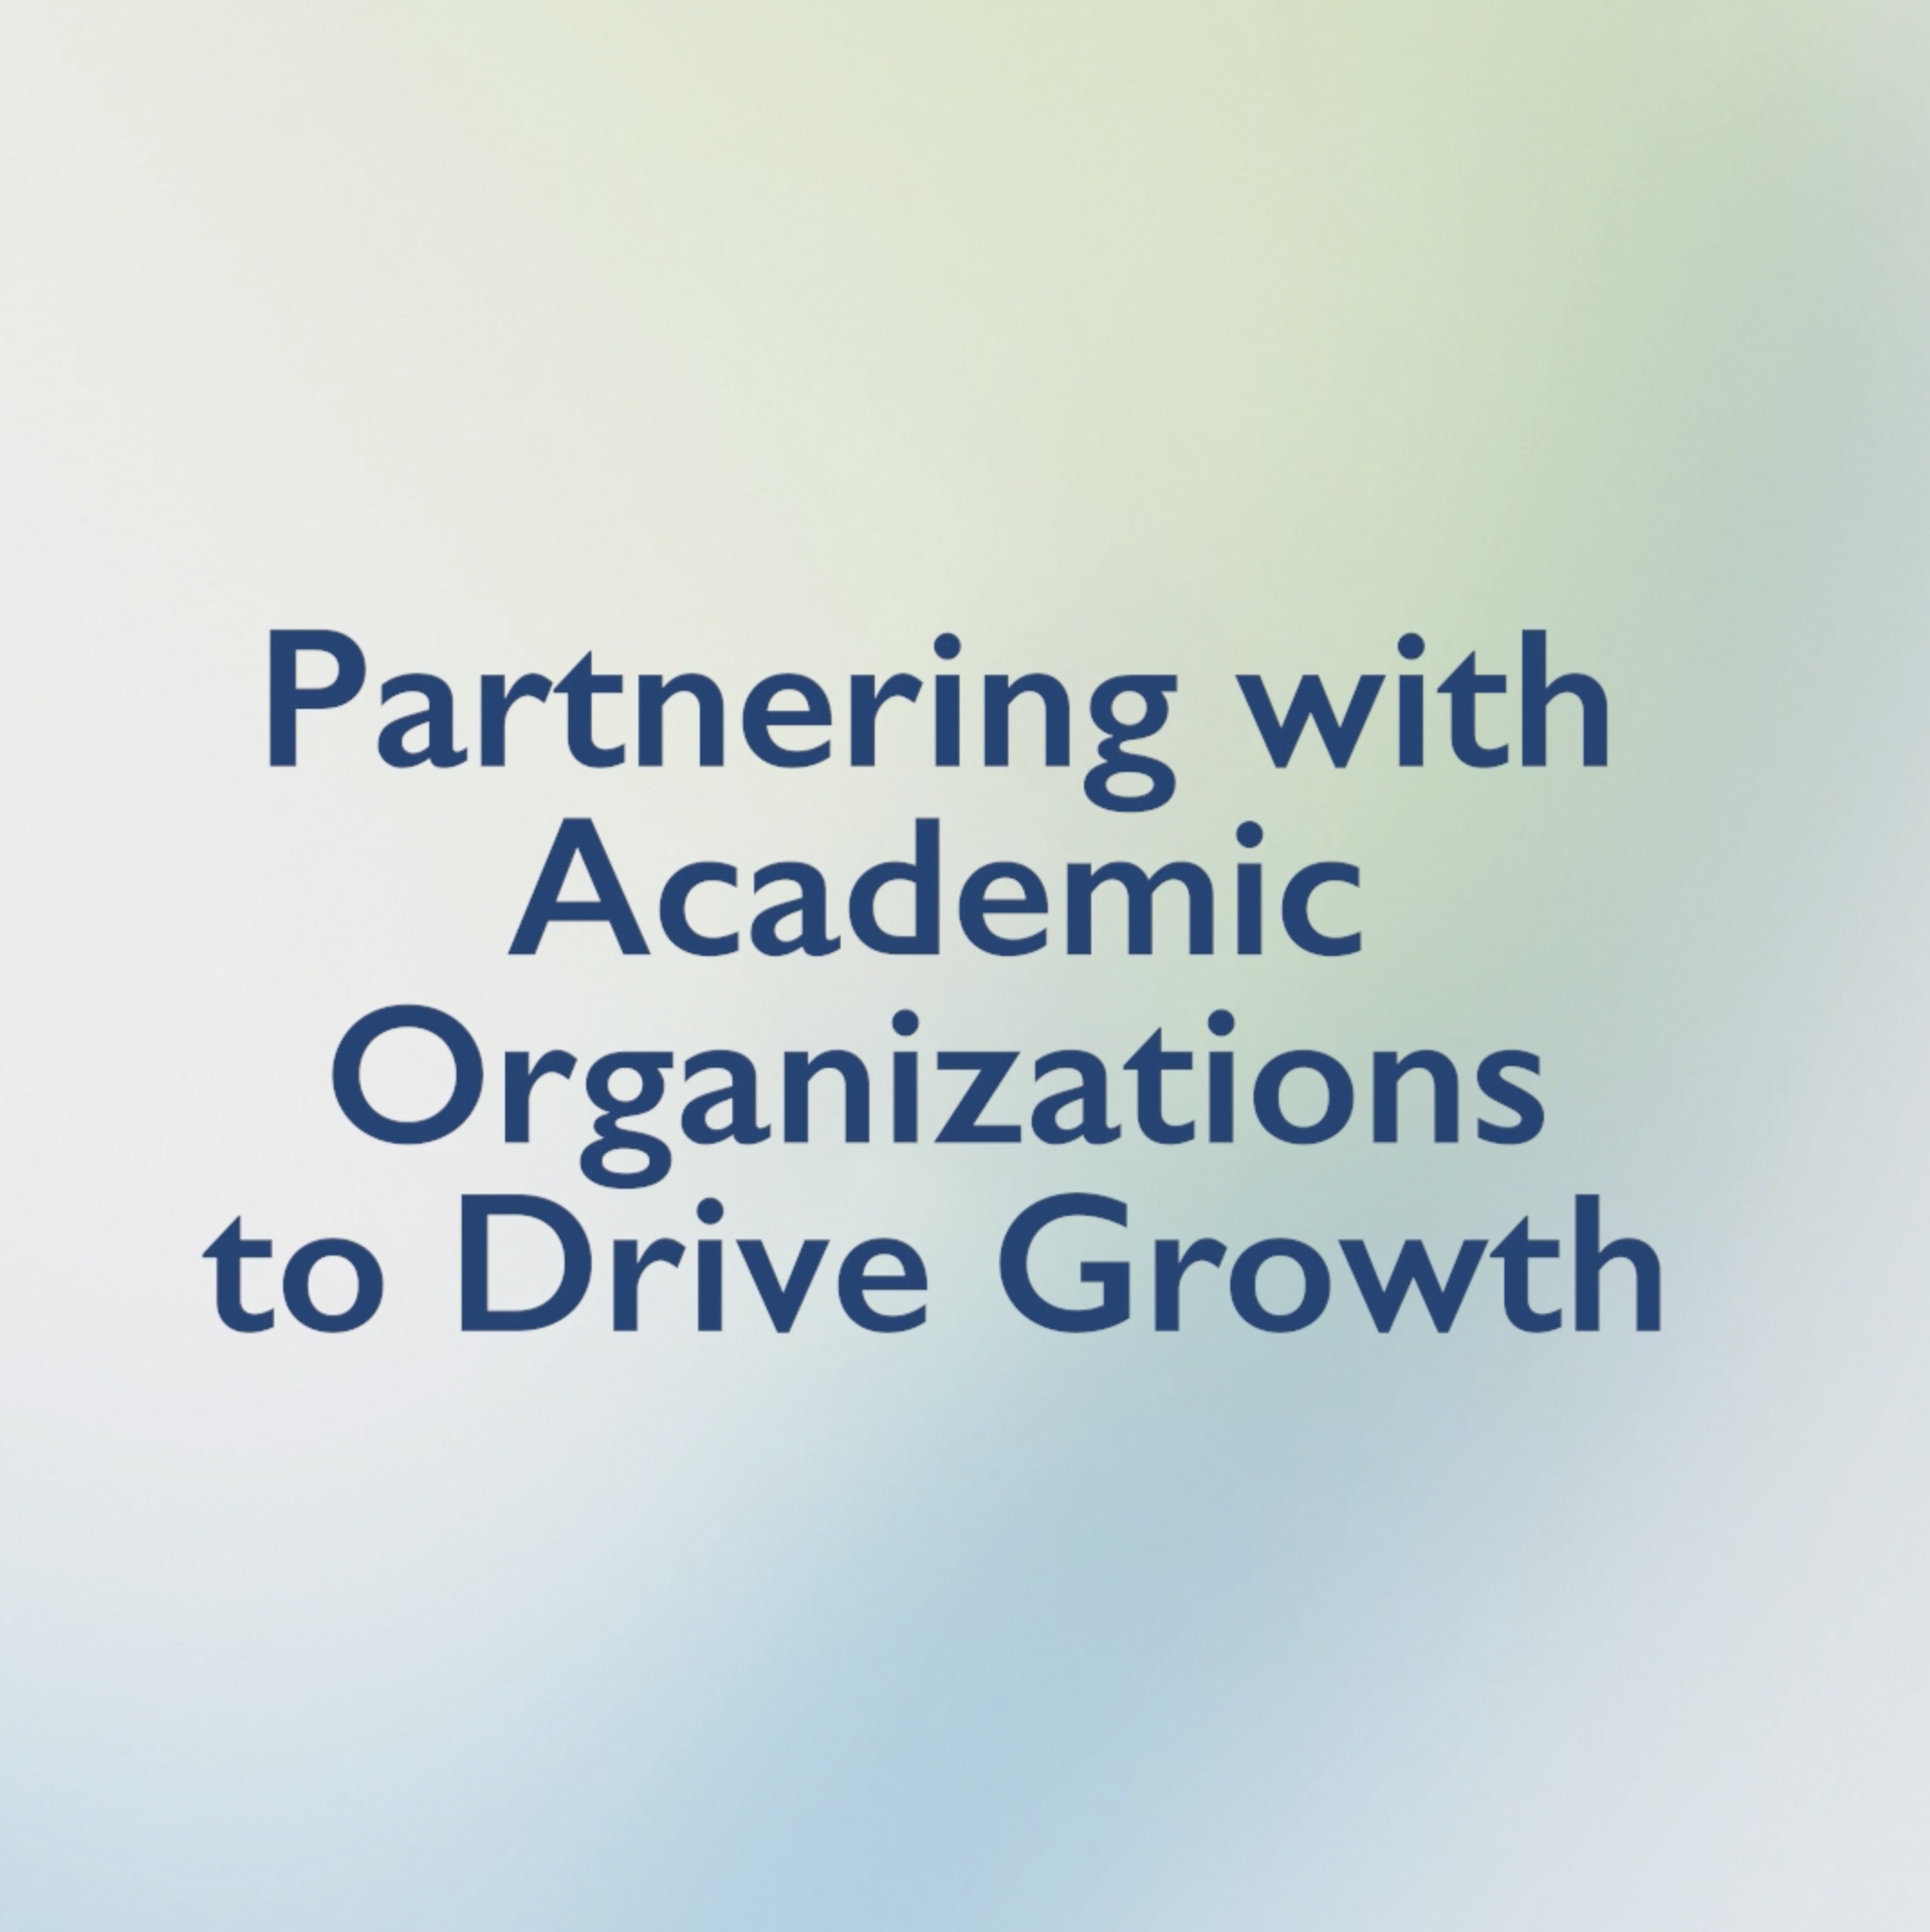 Partnering with Academic Organizations to Drive Growth